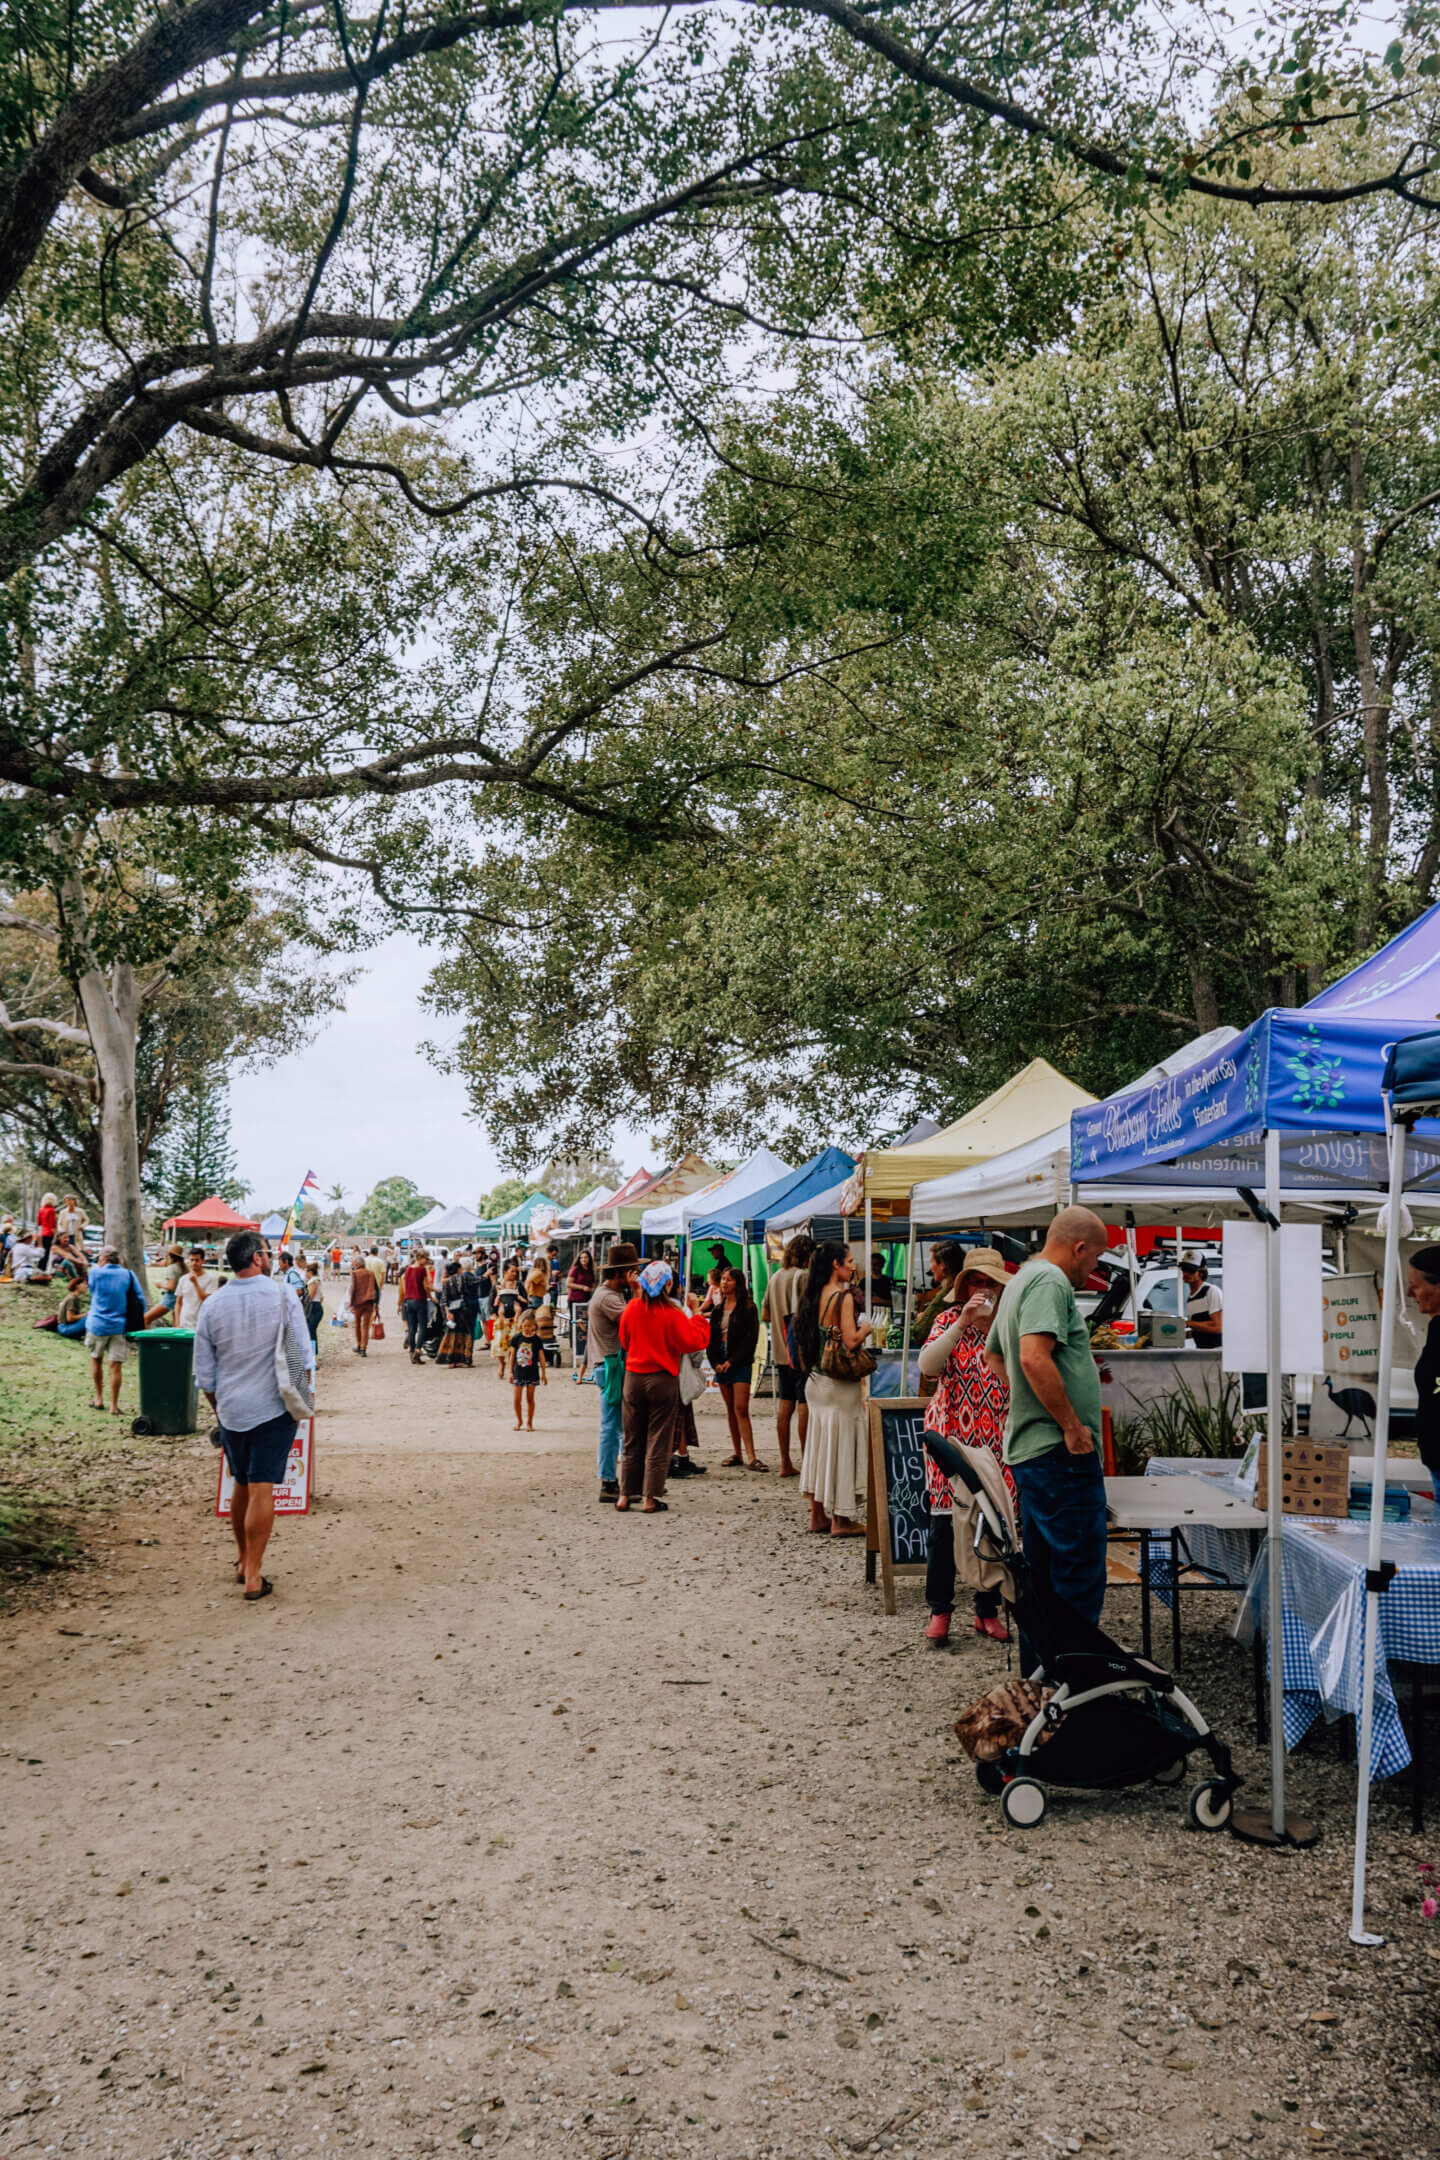 The stalls lined up at the Mullumbimby's Farmer's Market